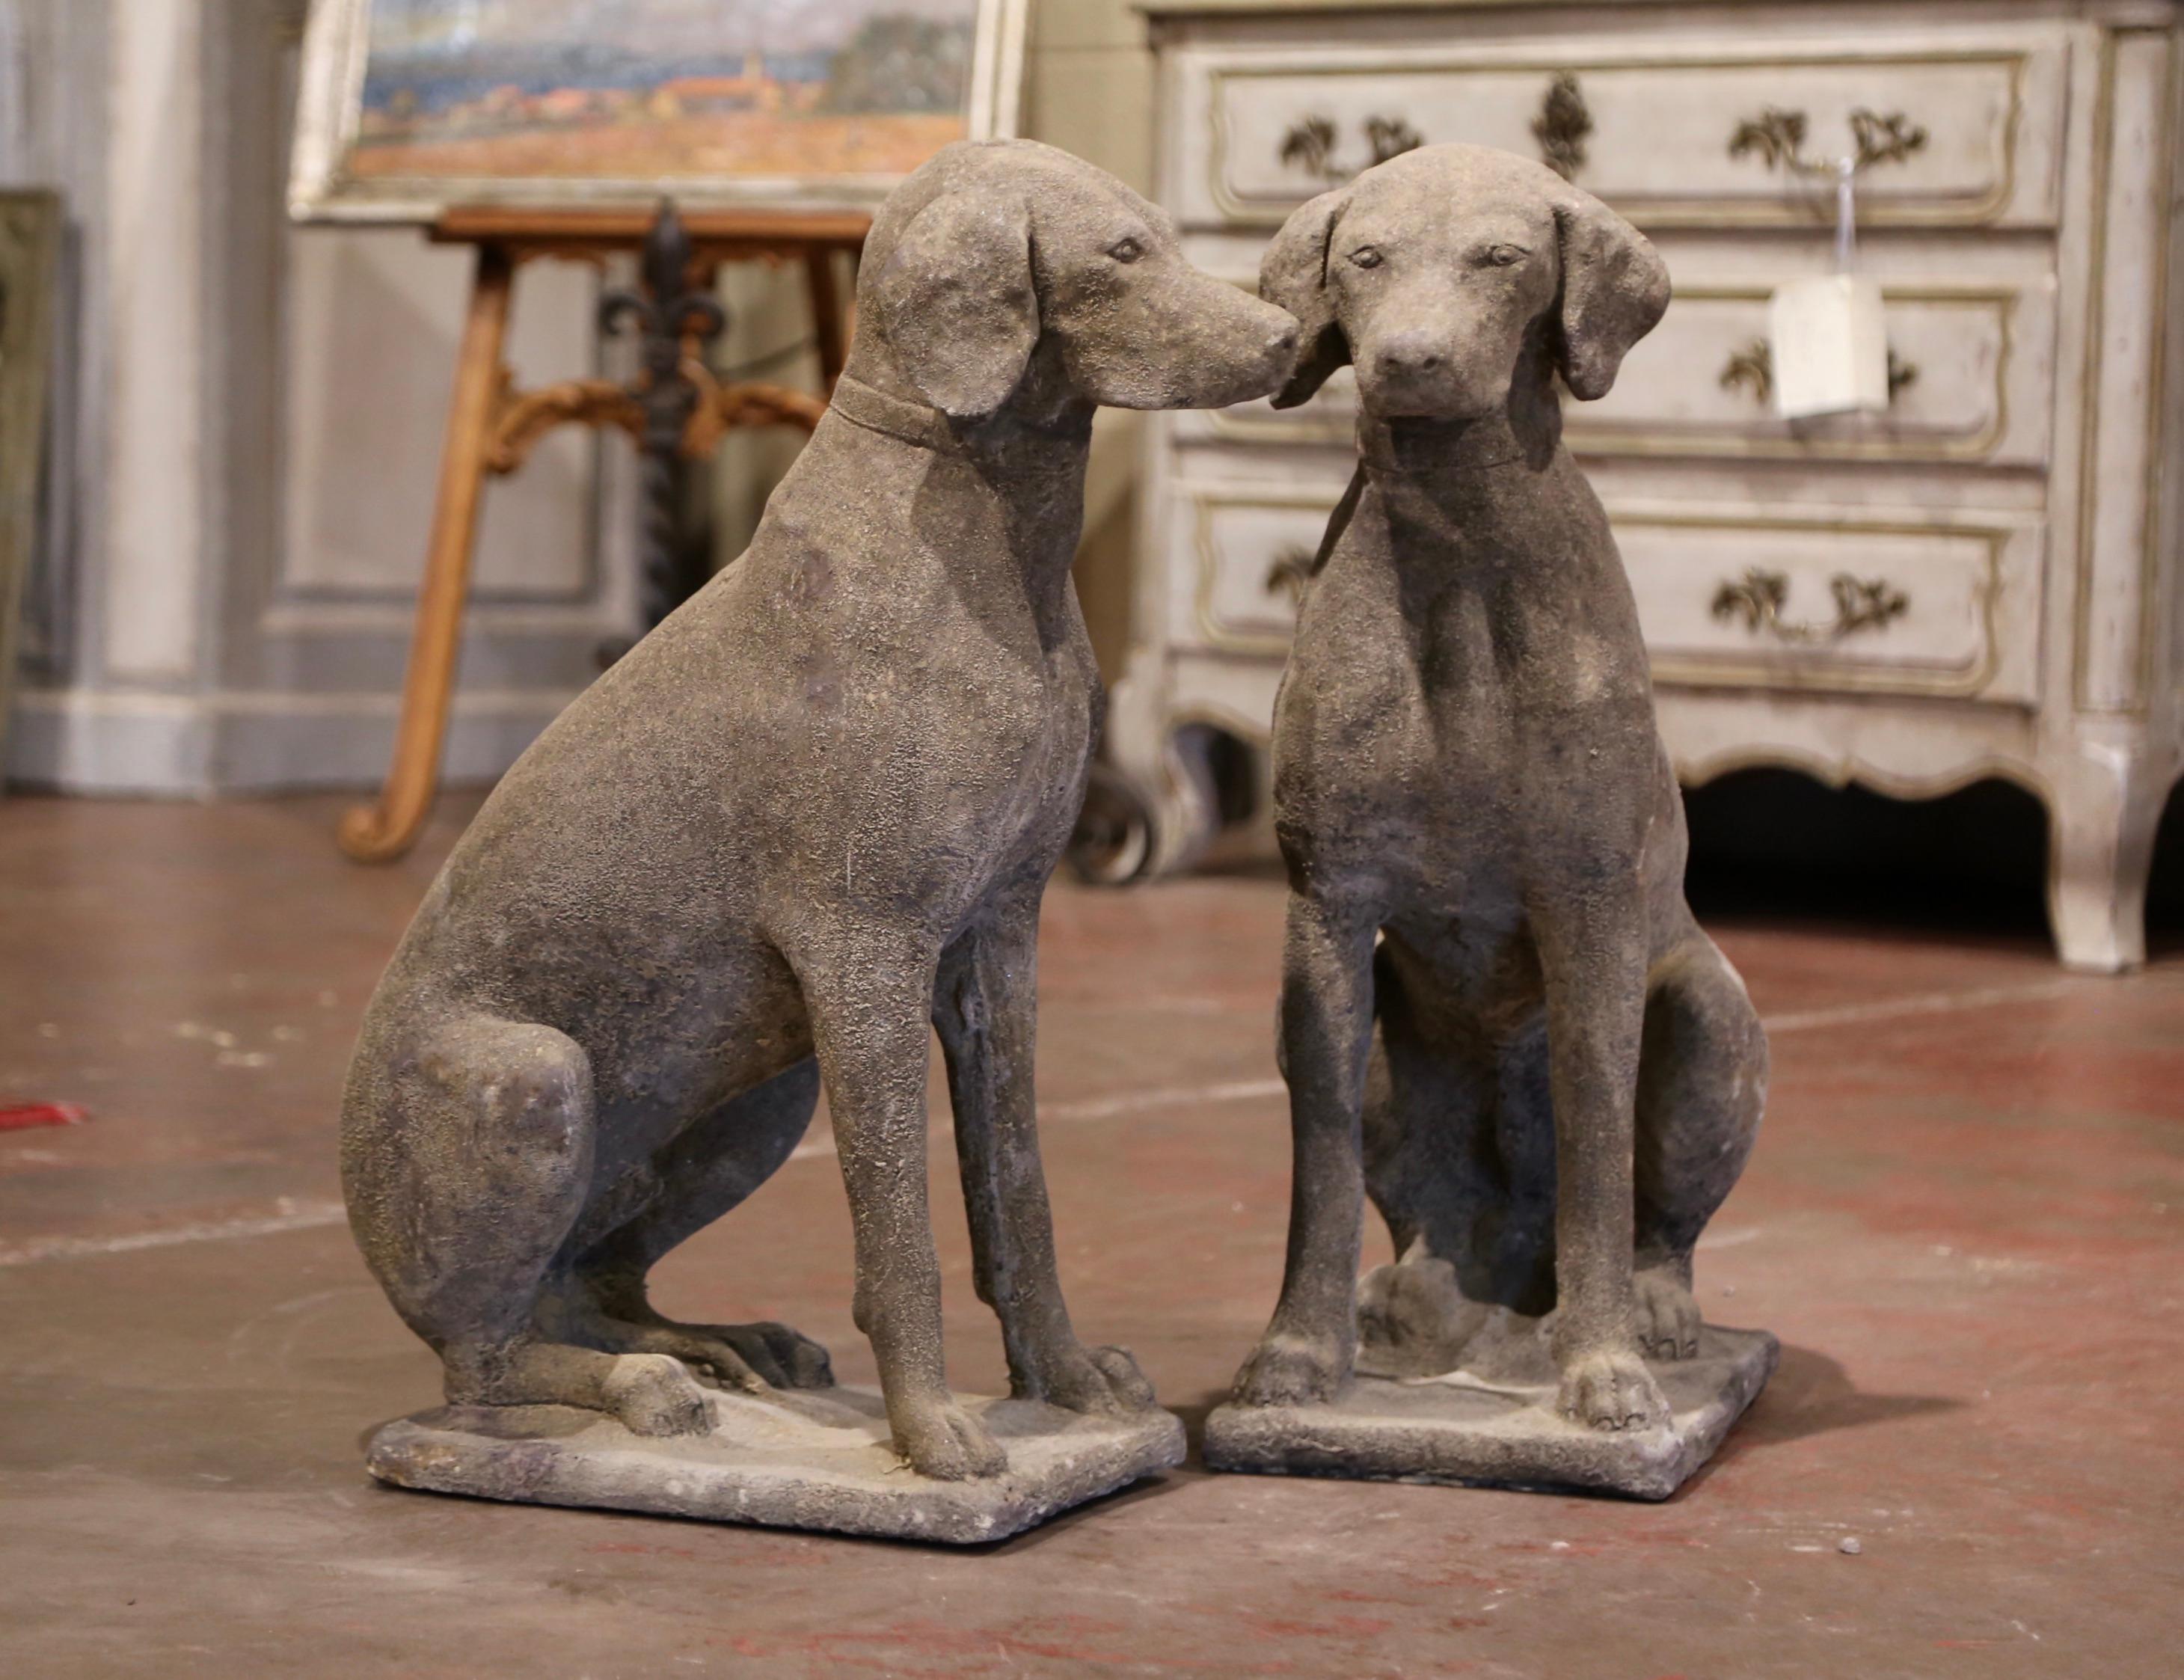 The hunting dogs sculptures were crafted in France, circa 2000. The stately, vintage Labradors with collar are set on a flat base and sitting on their back legs; they have wonderful expression and are further embellished with a collar around their